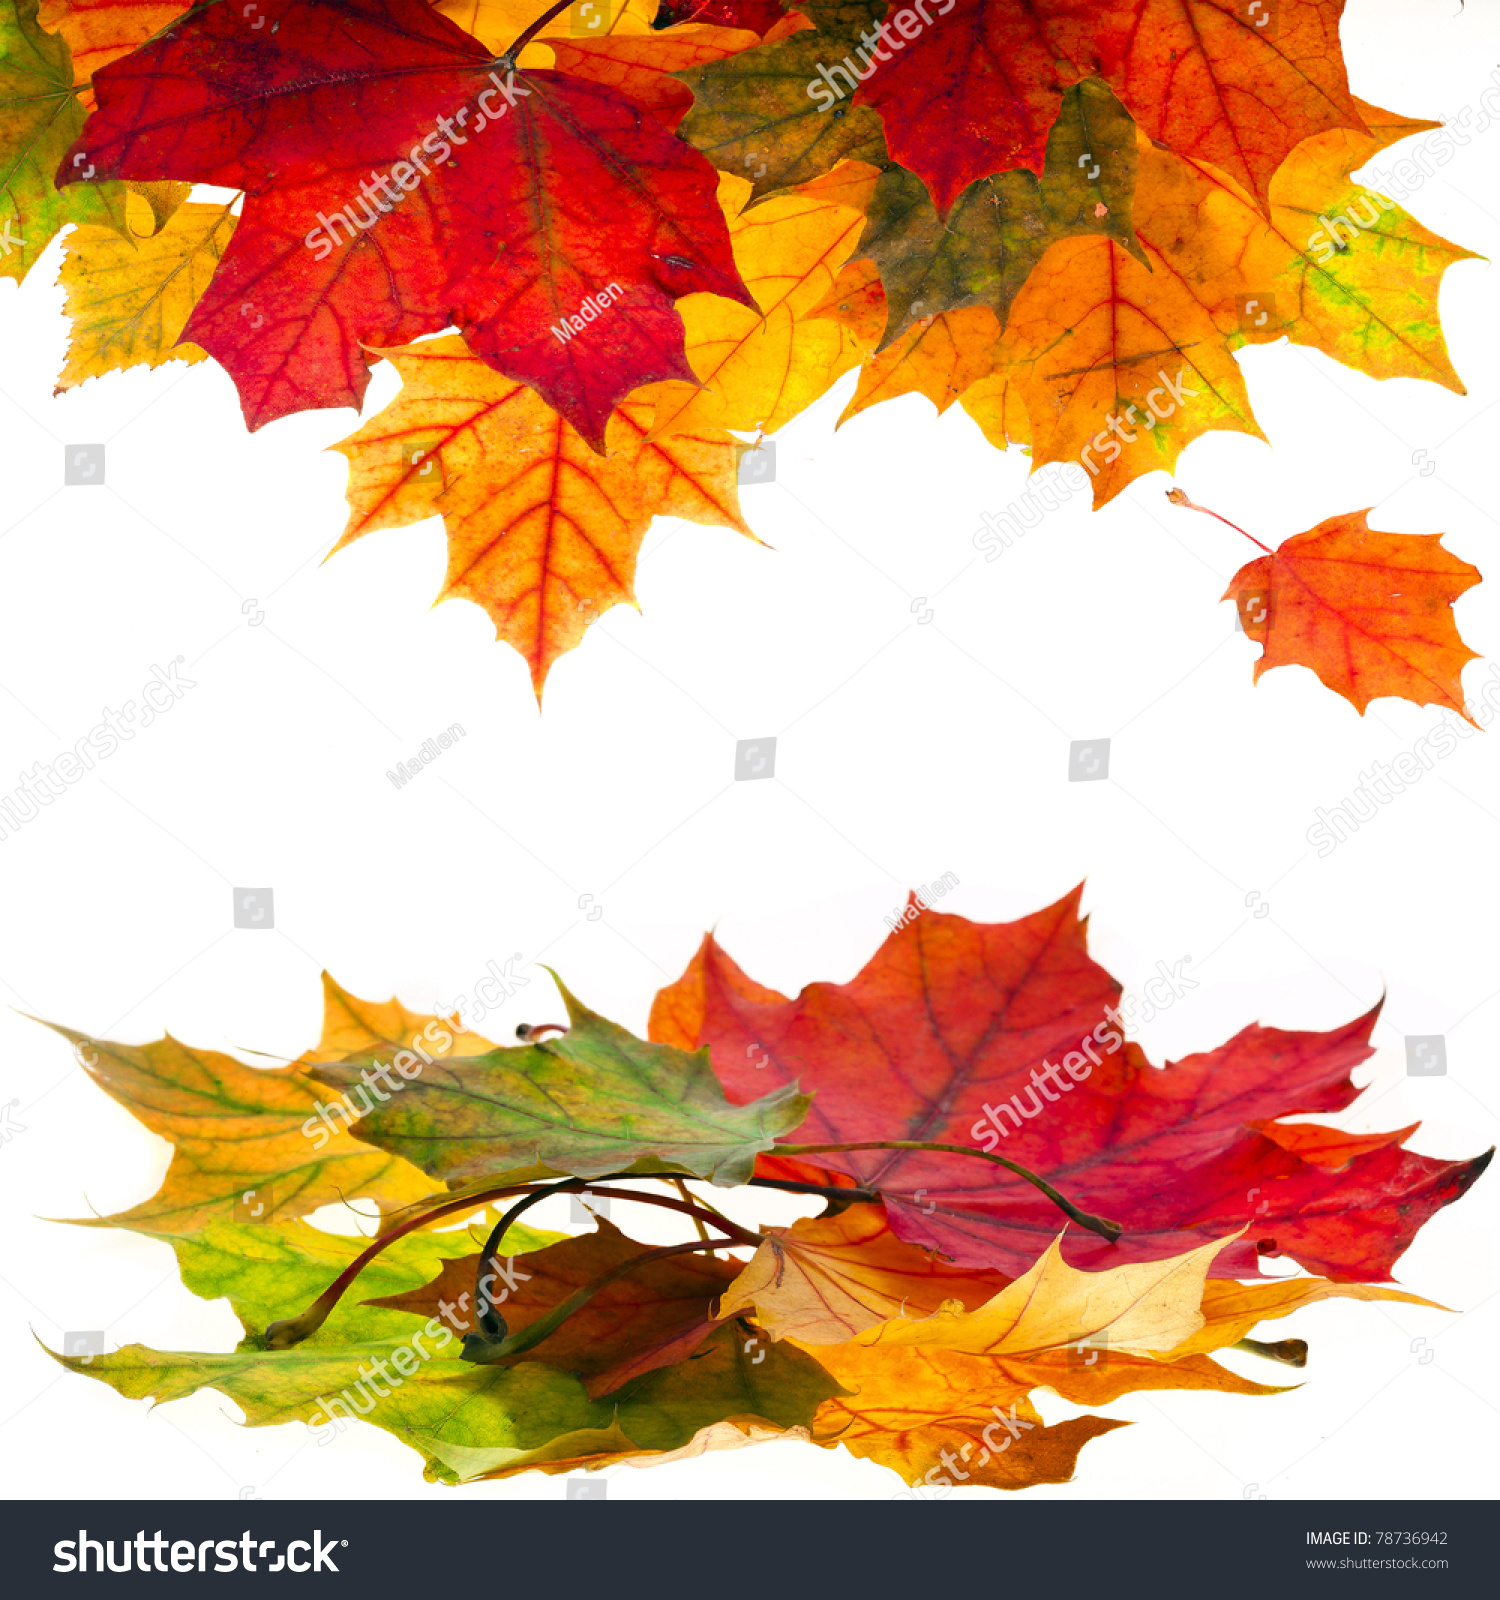 Autumn Leaves Falling Isolated On White Stock Photo 78736942 - Shutterstock